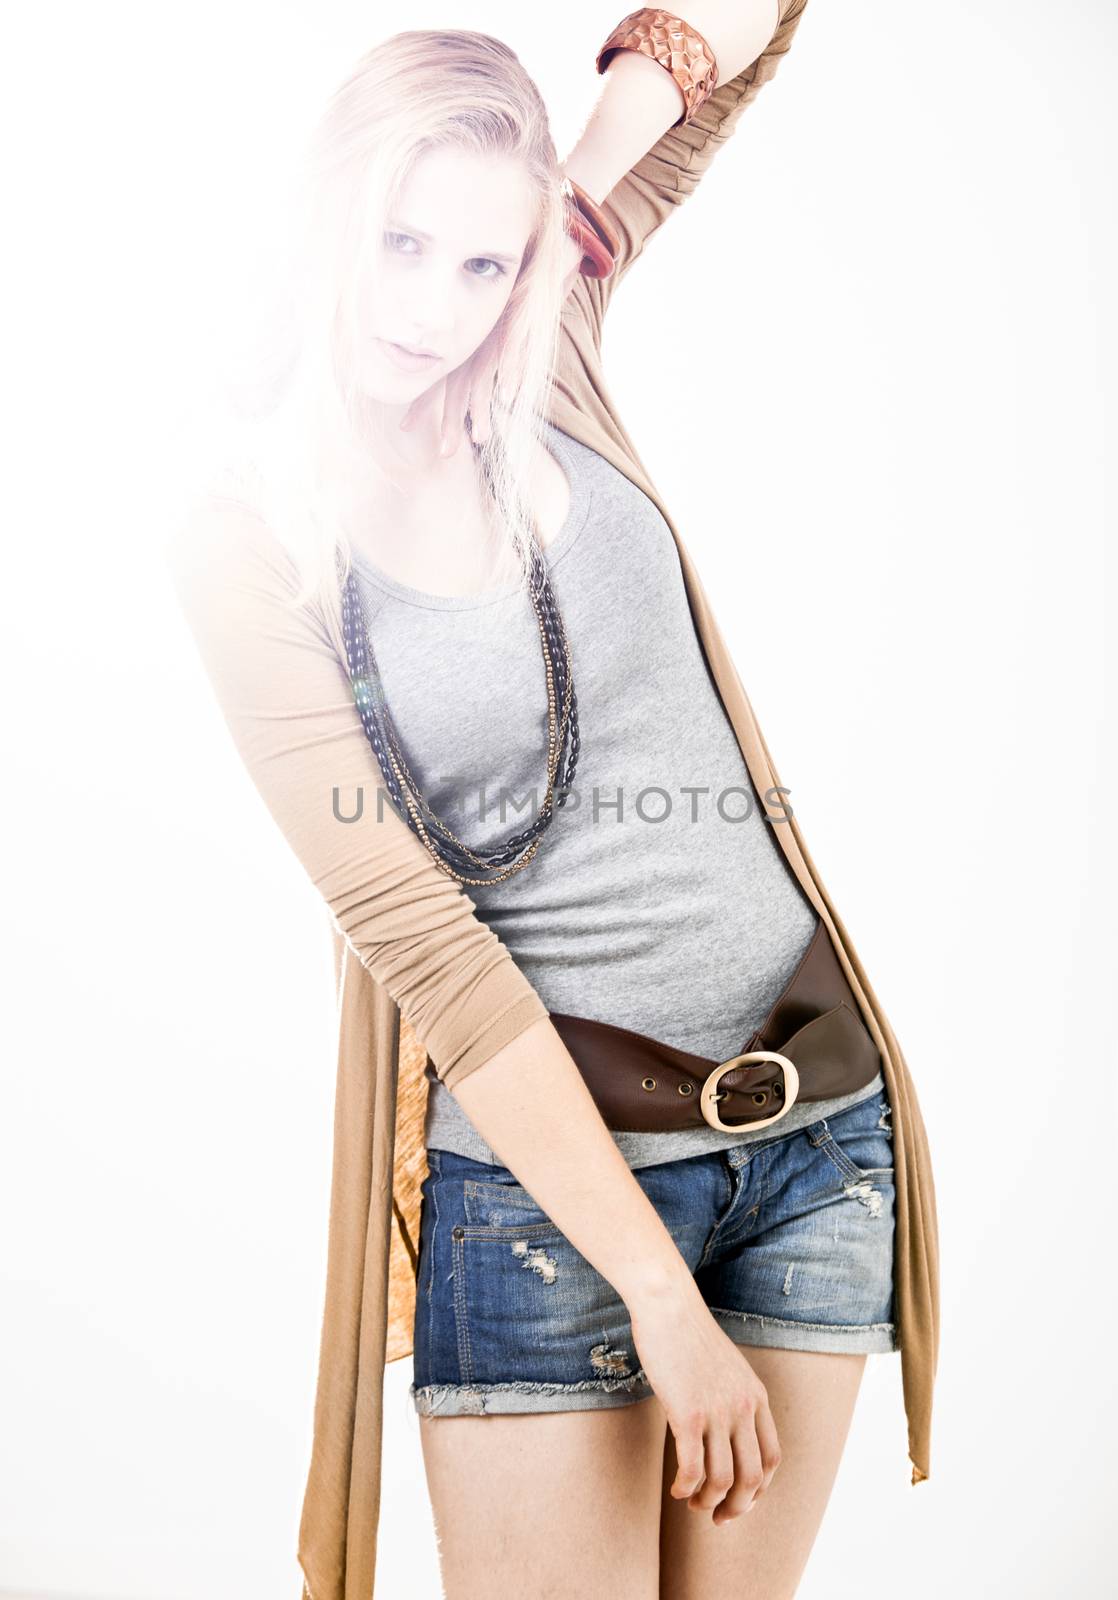 Beautiful fashion woman posing over a white background